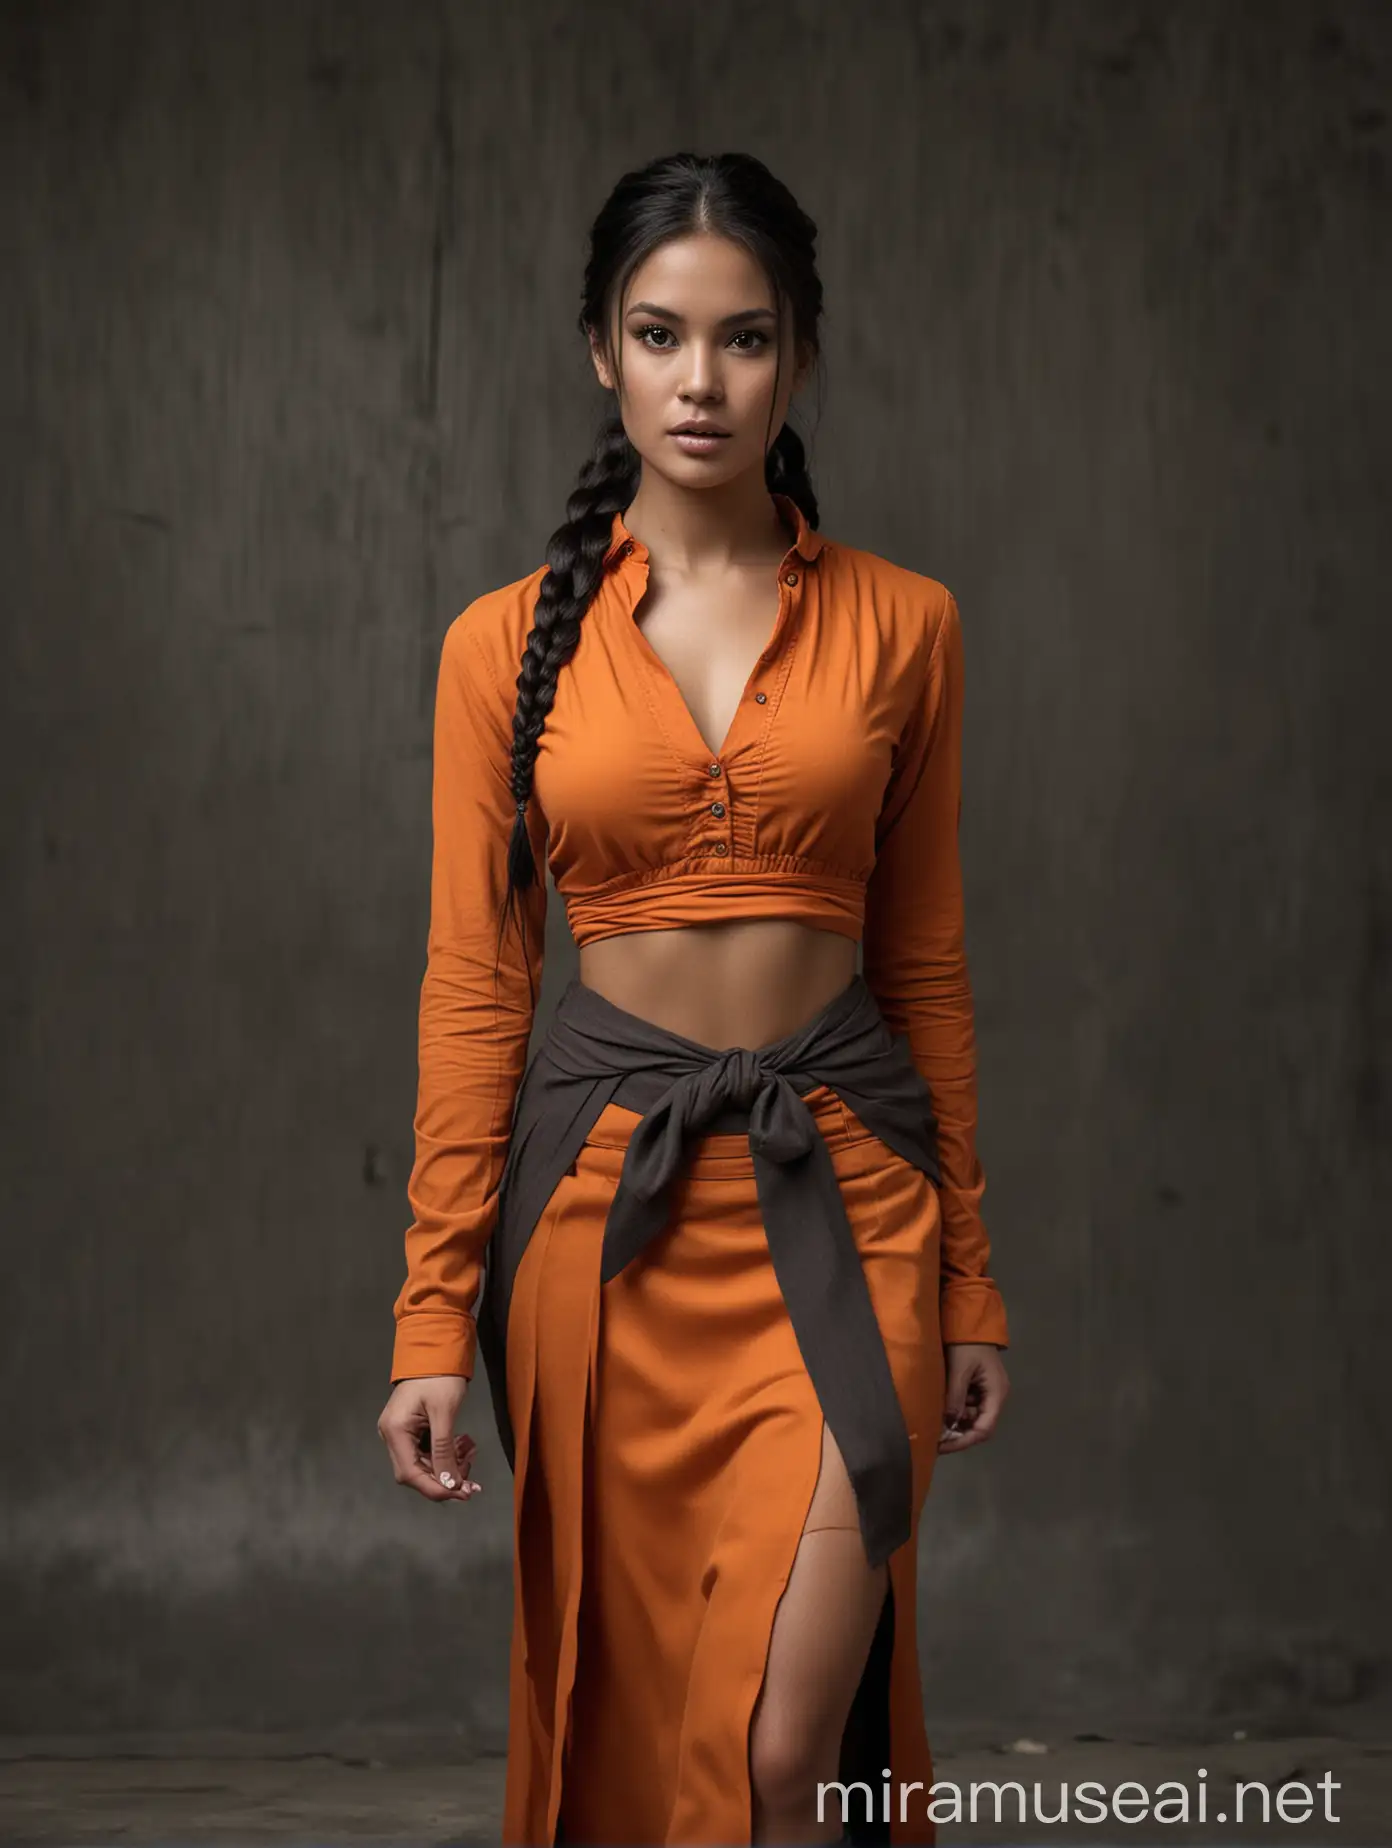 Young woman, Peruvian, dark black hair tied in a long braid with a brown hair tie, orange dress with long sleeves, an upturned collar, two slits on either side of the skirt, and dark grey pants, dark, cinematic, epic, sexy, cute